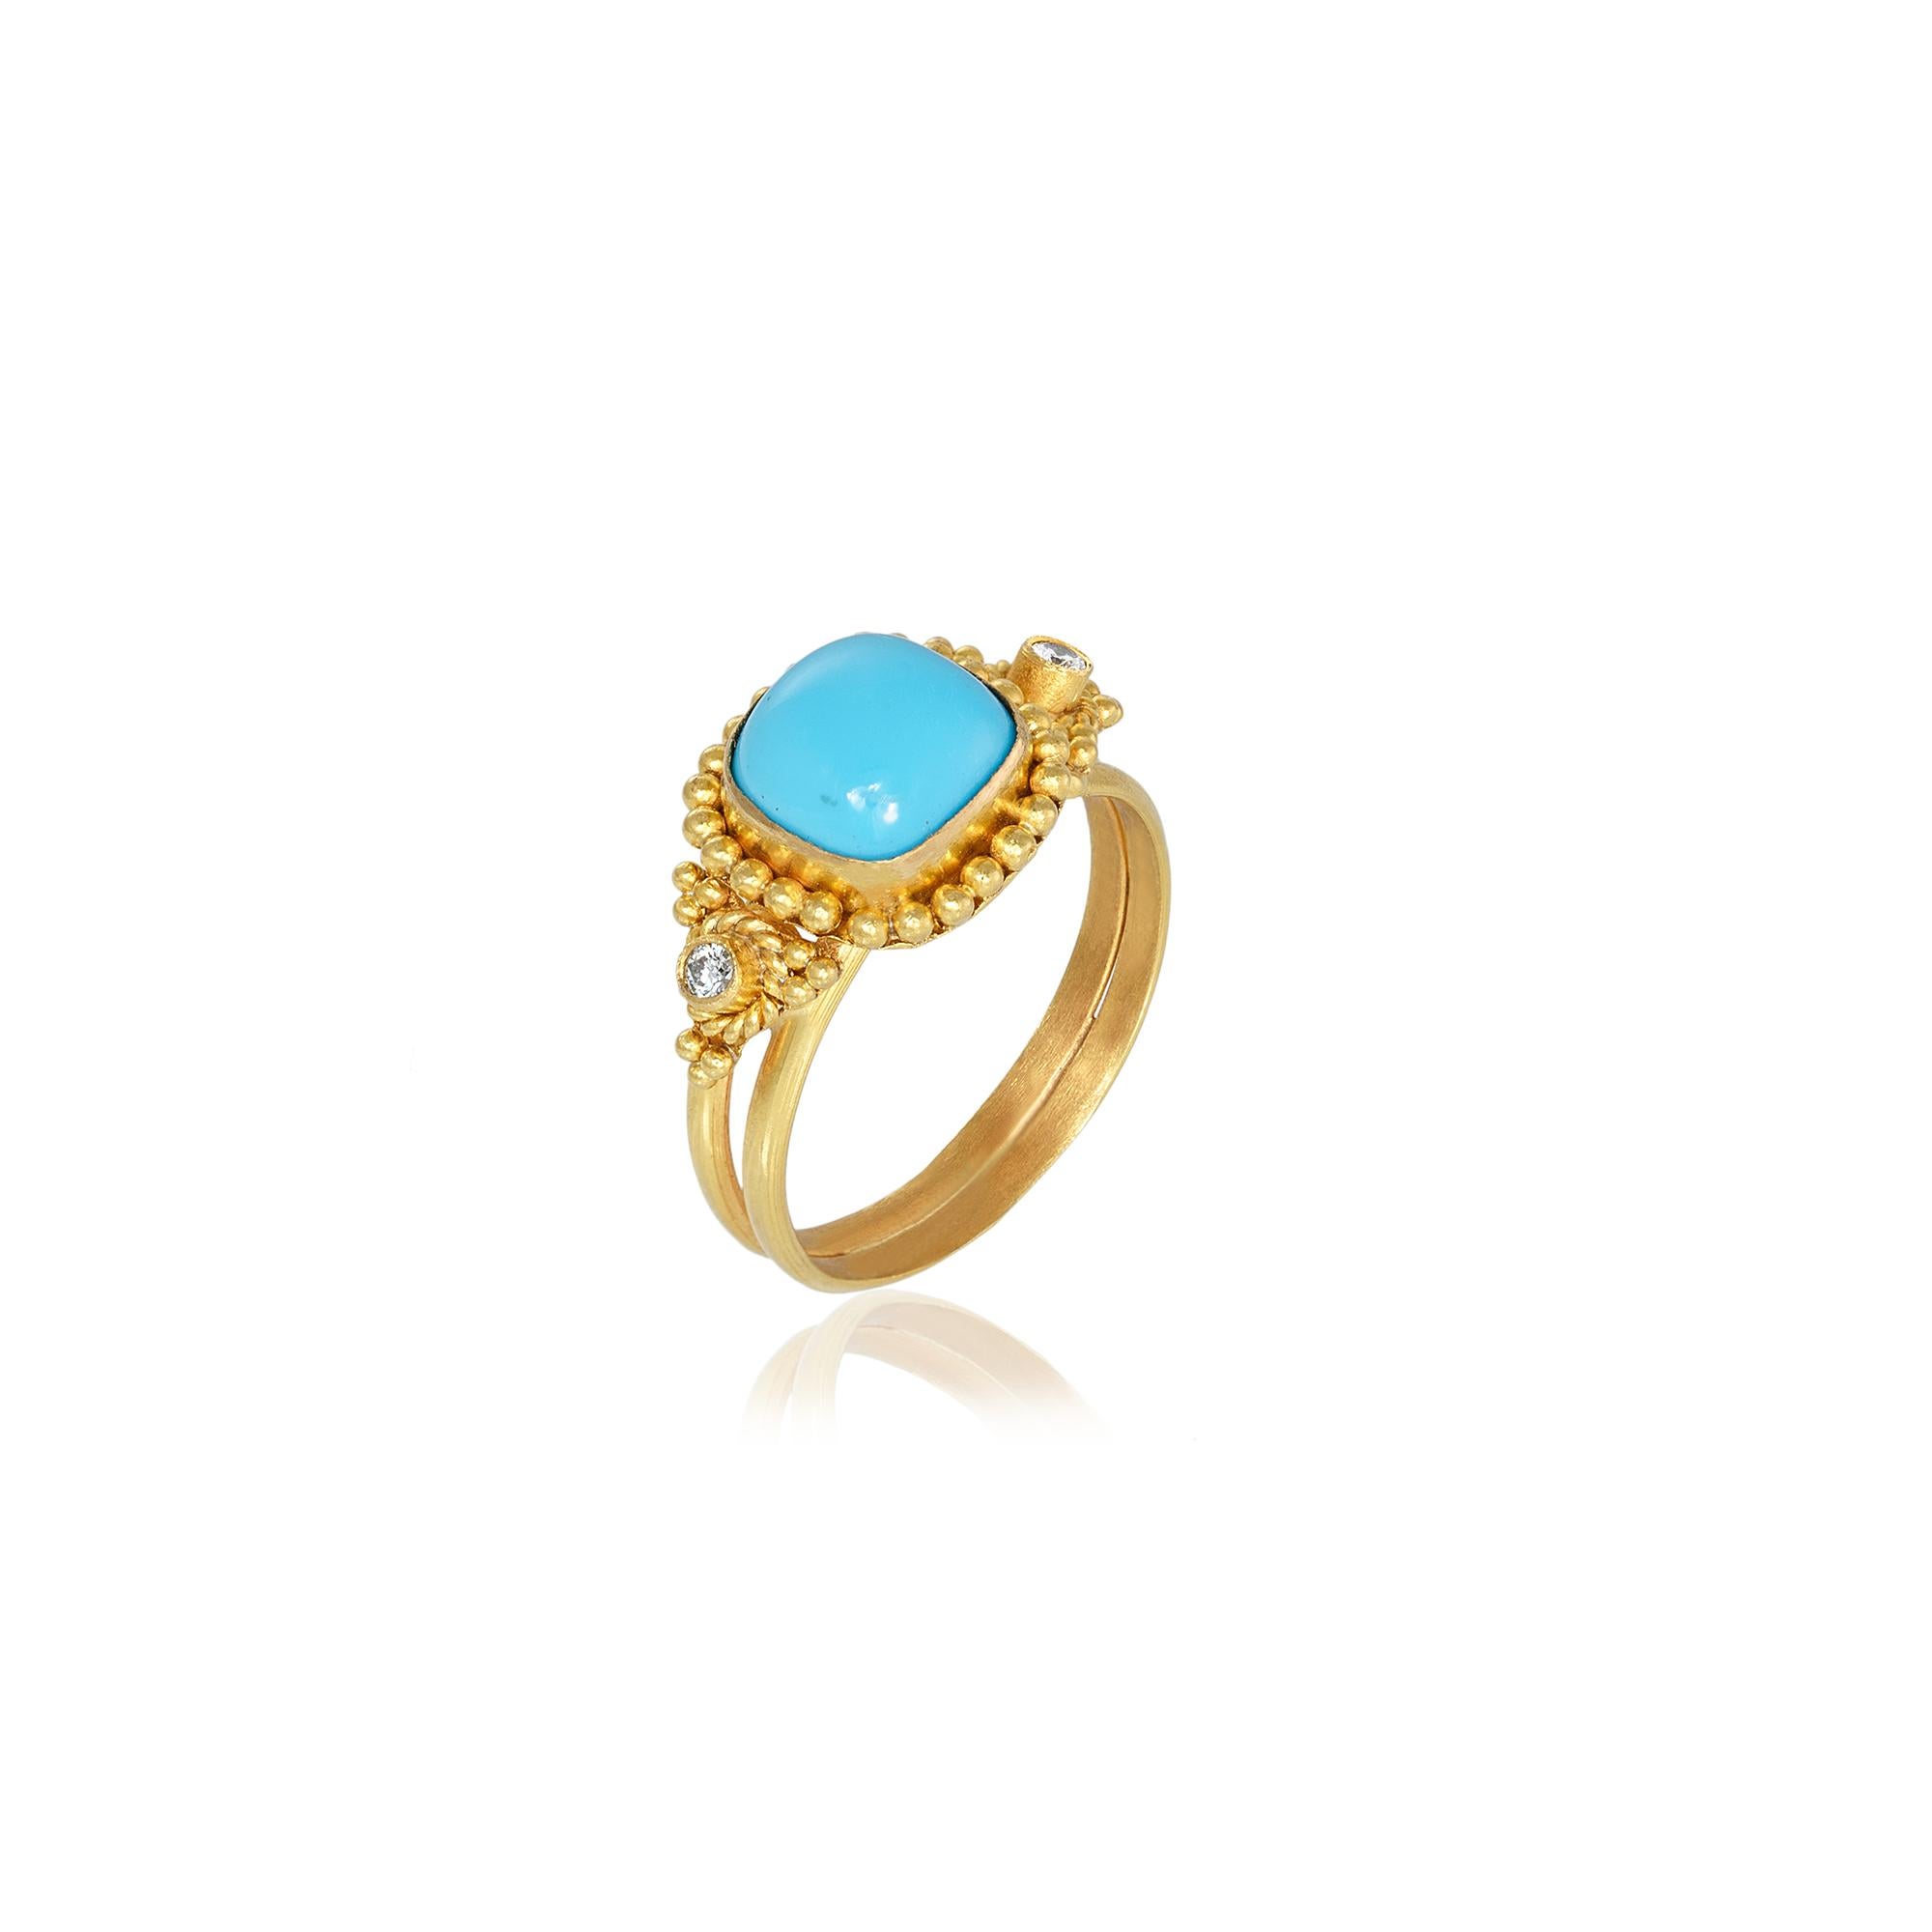 Byzantine Granulation ring handcrafted in 22Kt yellow gold, featuring a Cabochon Turquoise center and two brilliant cut diamonds. The double base of the ring, the blue of the Turquoise and the elegant combination of granulation and filigree